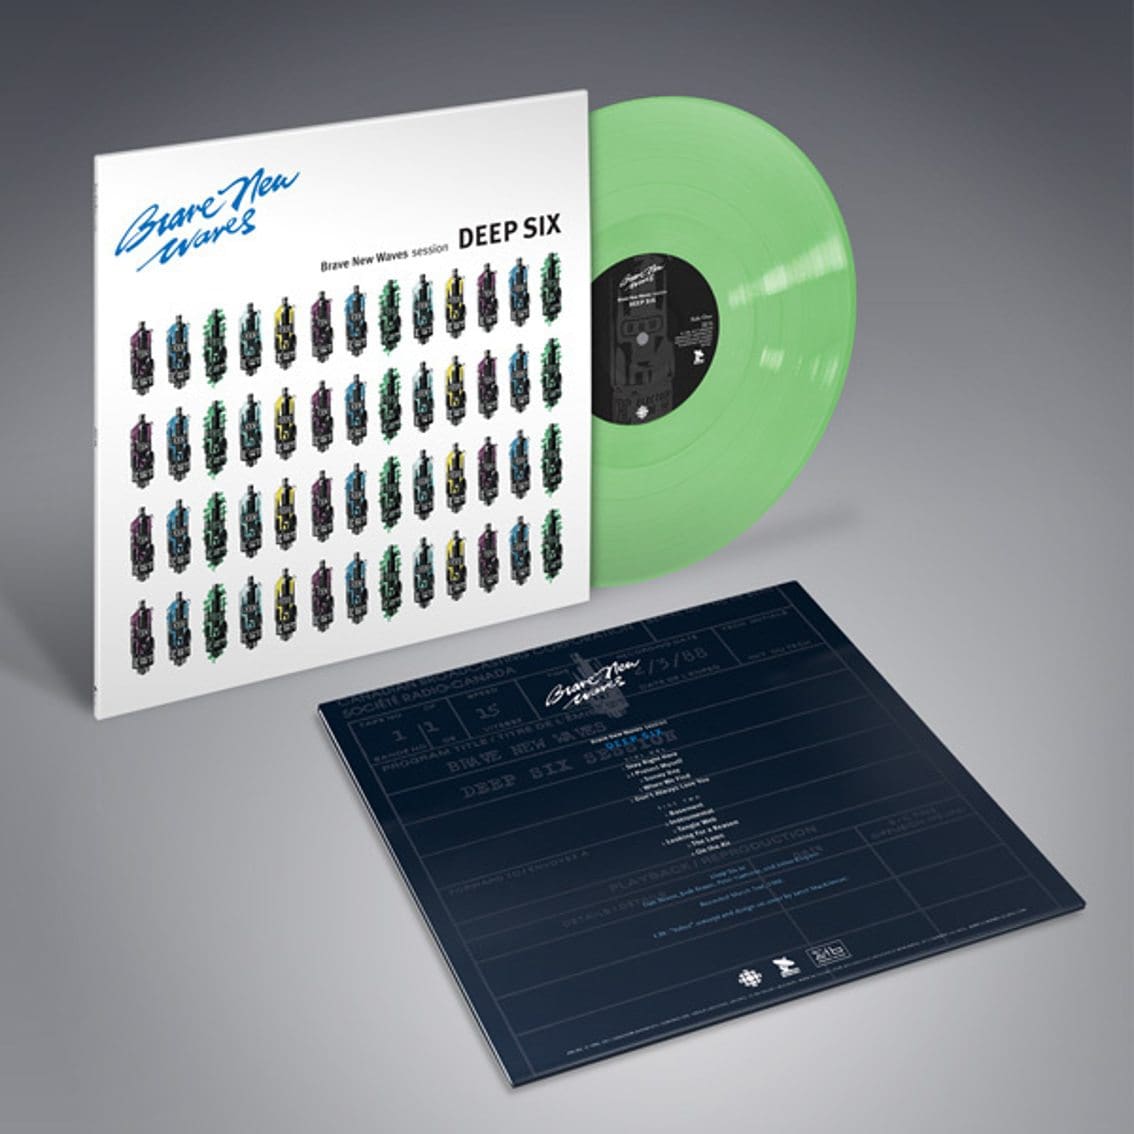 Deep Six gets long forgotten 'Brave new waves session' material released on green vinyl